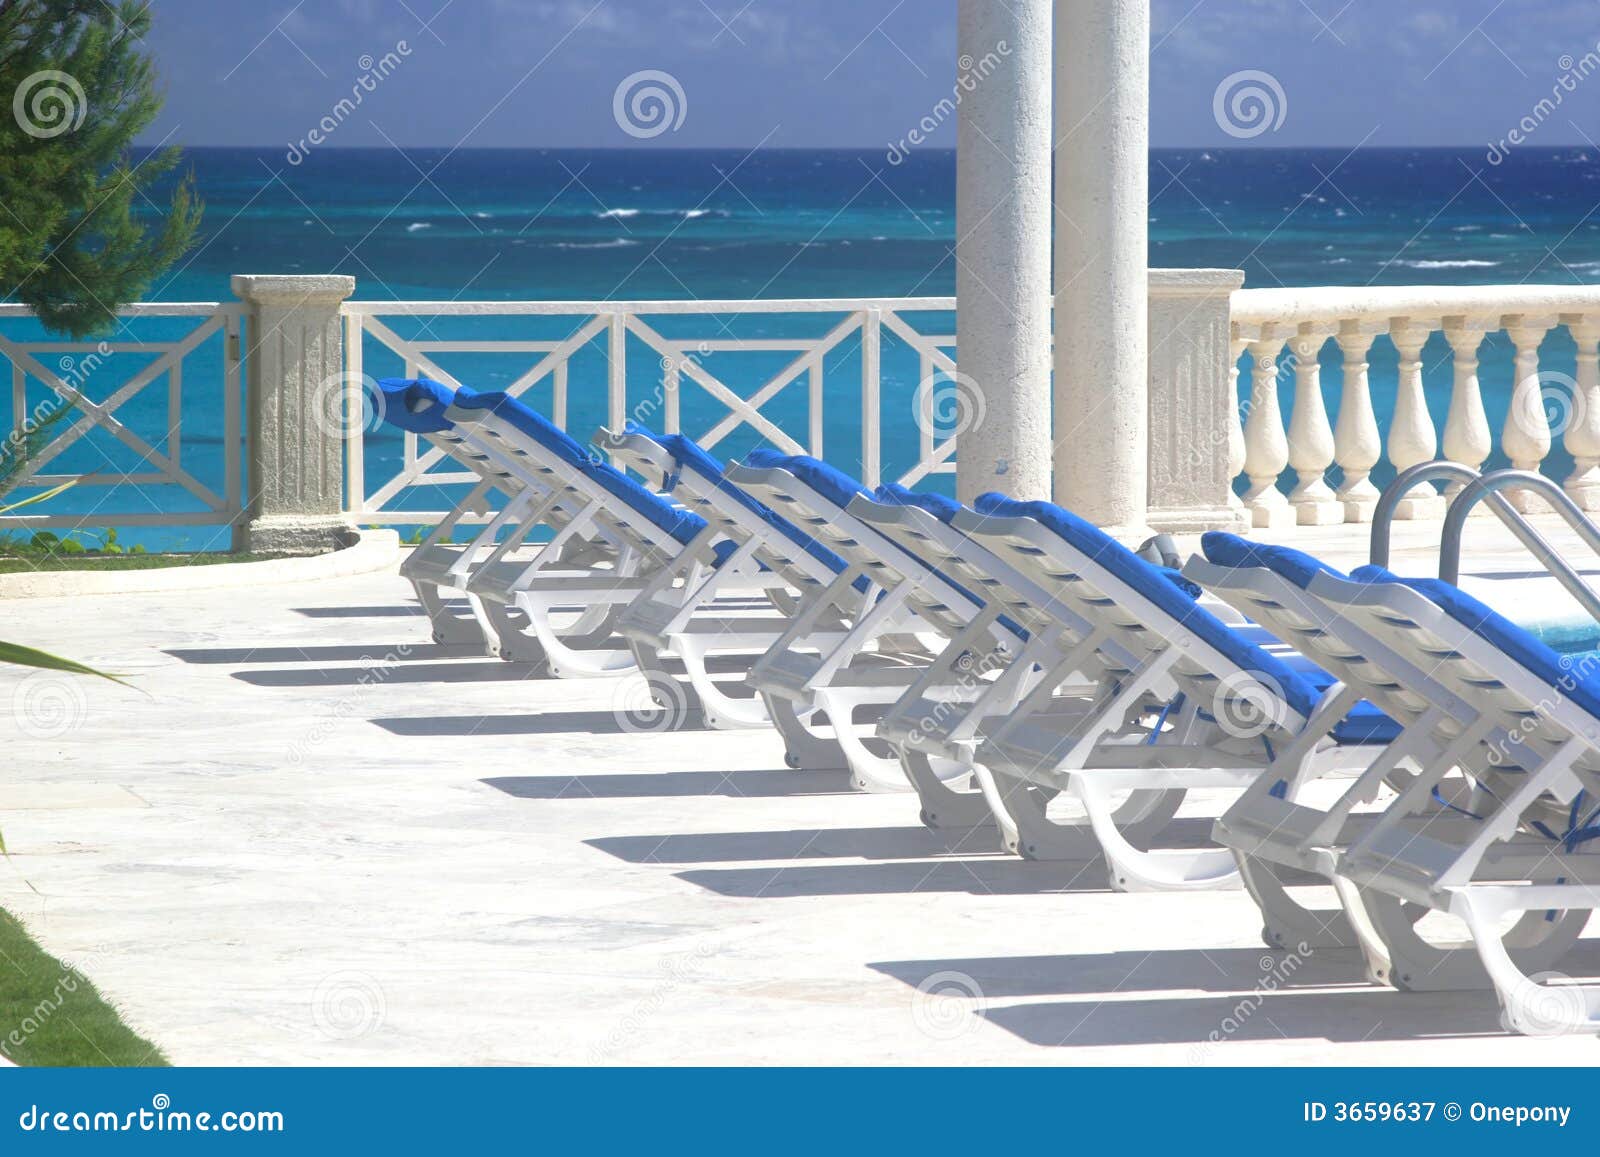 Pool Lounge Chairs 2 stock image. Image of holiday, chair - 3659637